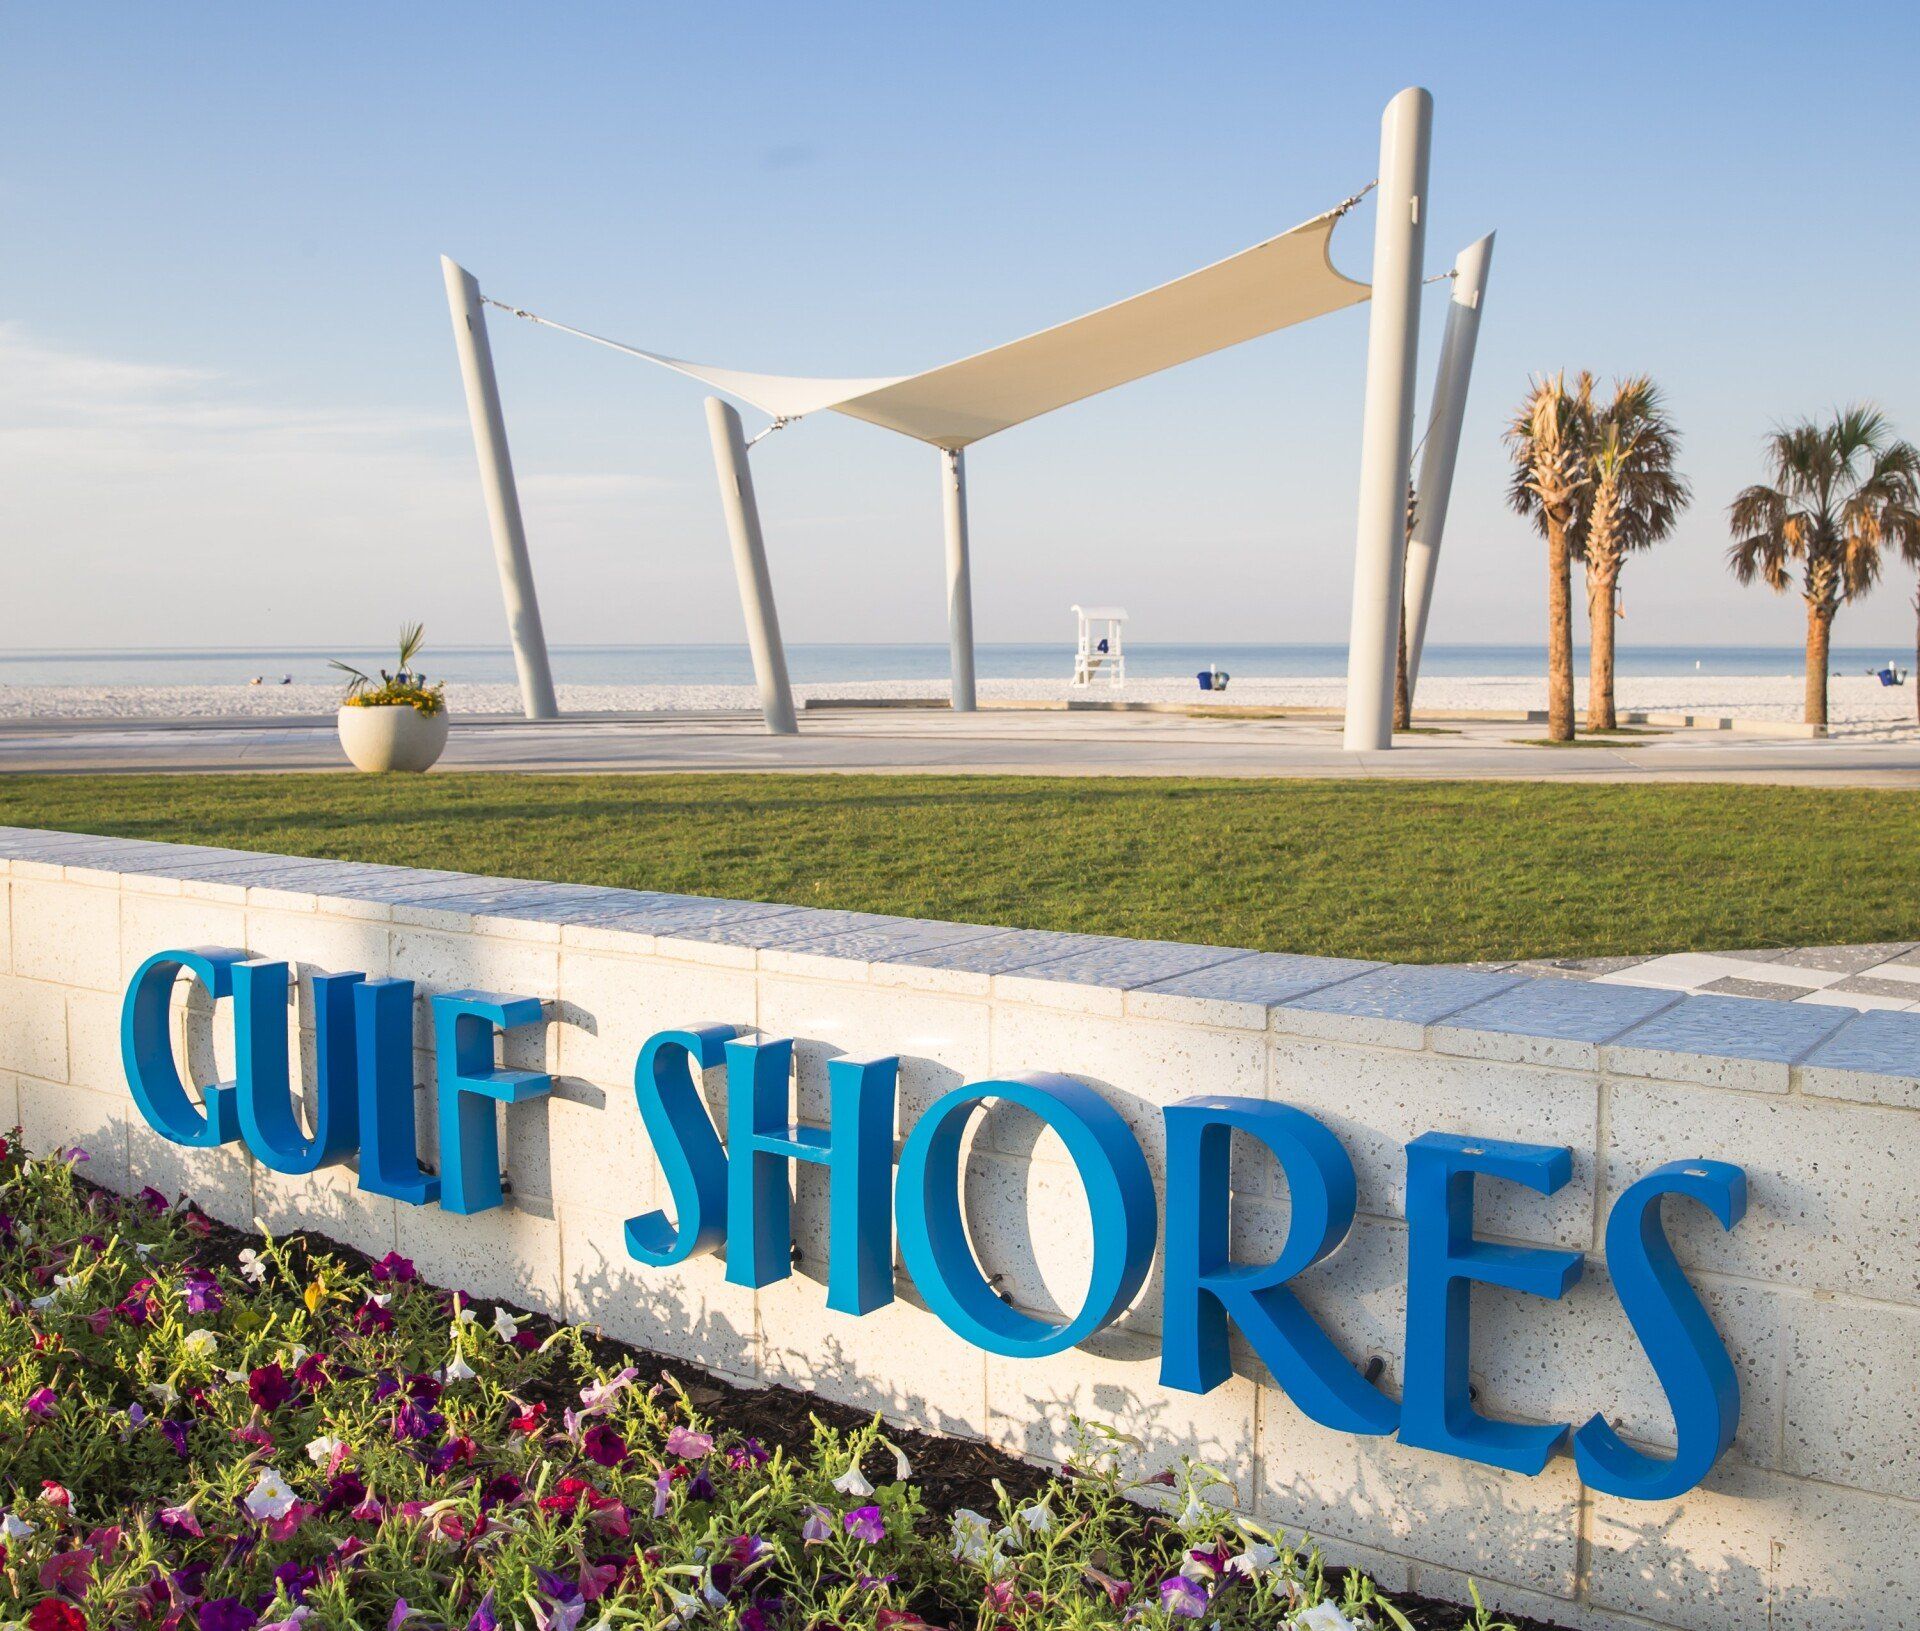 Gulf Shores, Alabama, will spend $337,306 for phase 2 of work in the city's Beach Walking District.